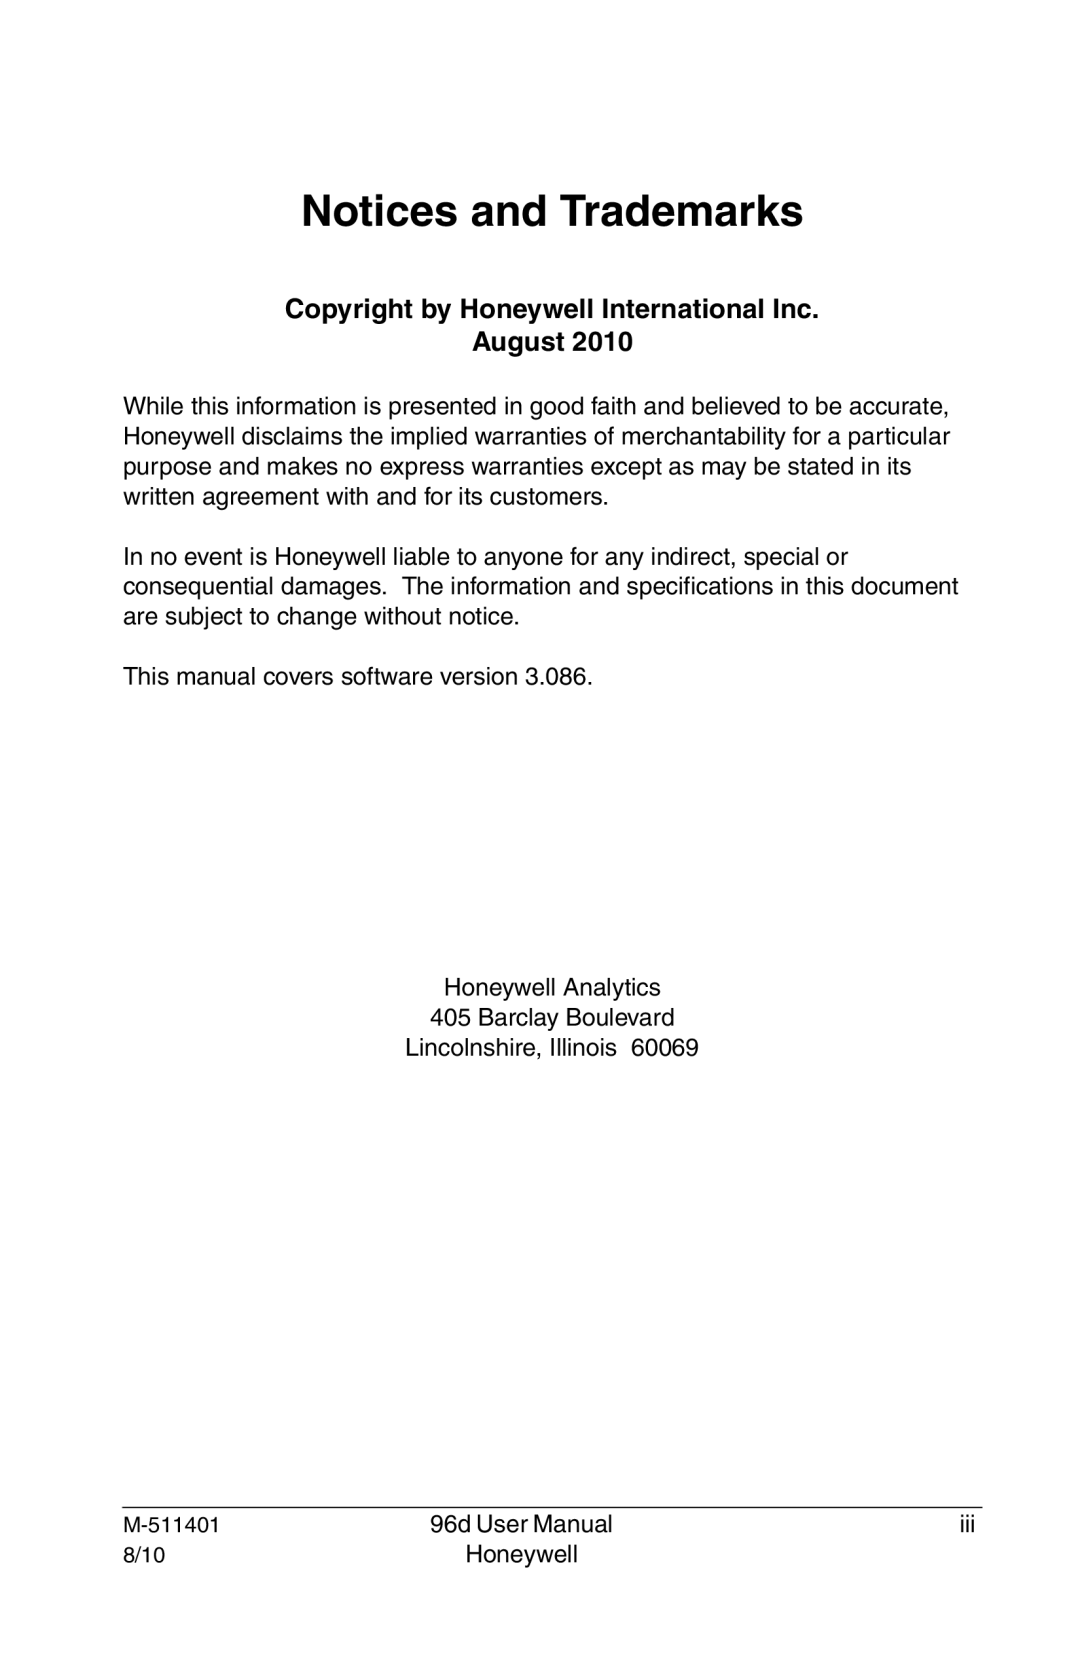 Honeywell 96D user manual Notices and Trademarks, Copyright by Honeywell International Inc August 